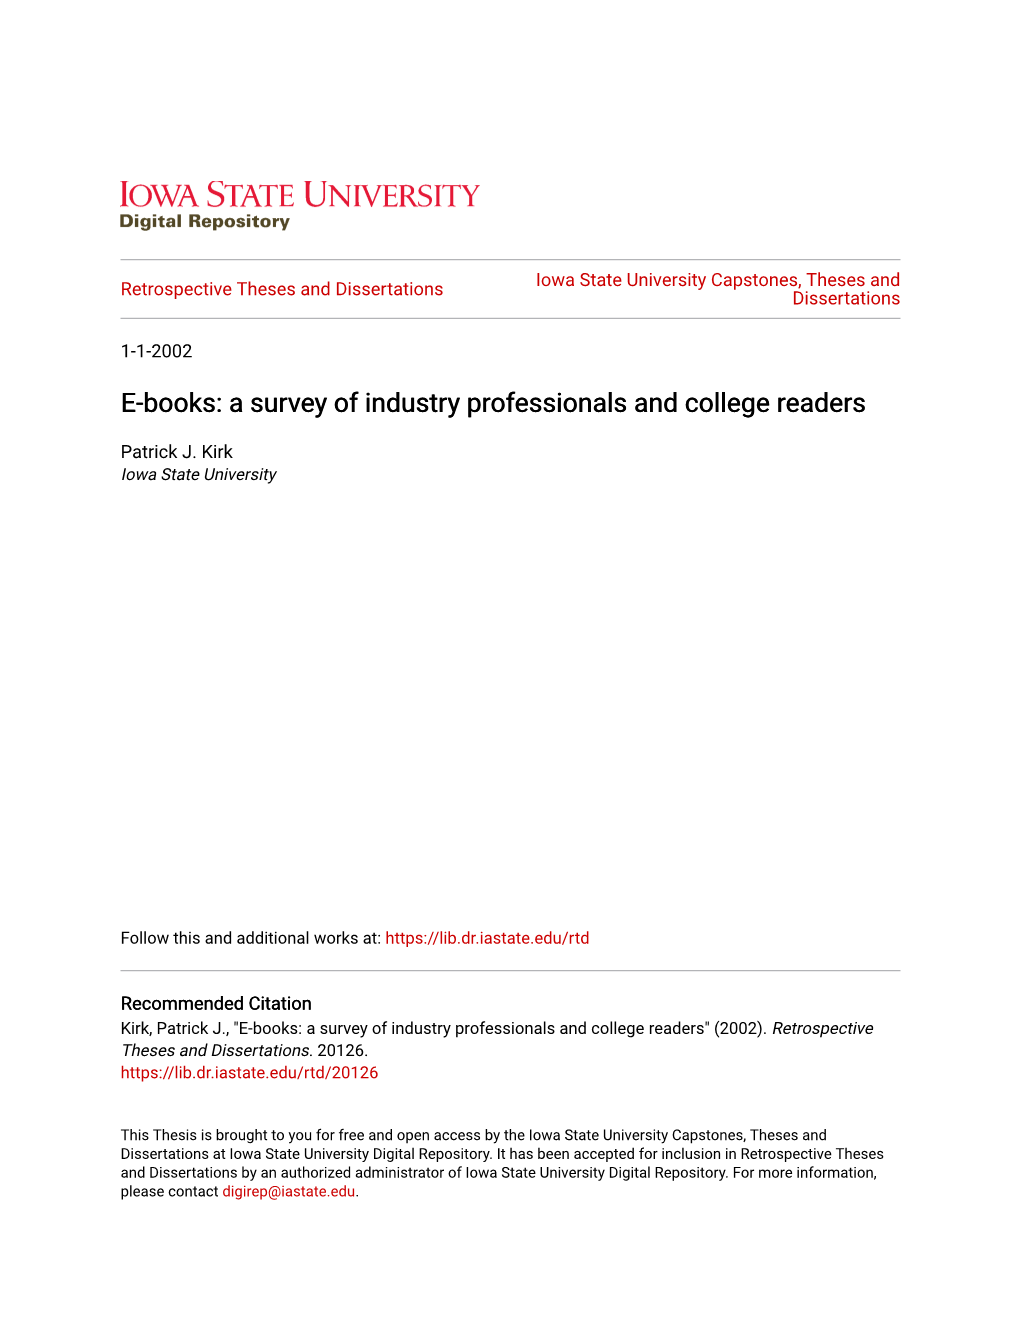 E-Books: a Survey of Industry Professionals and College Readers